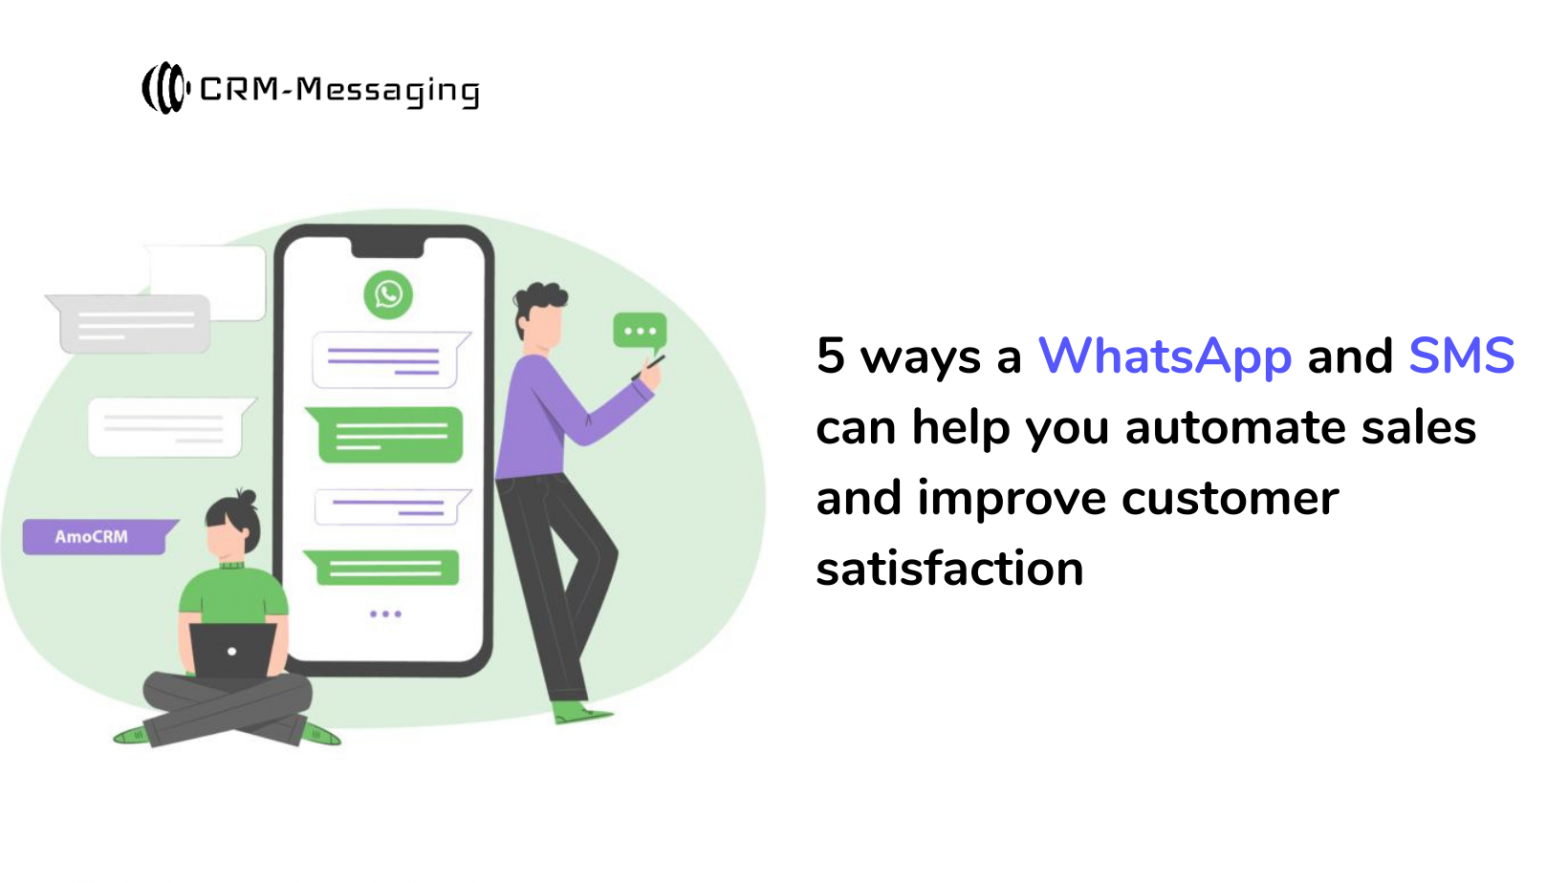 5 ways a WhatsApp and SMS can help you automate sales and improve customer satisfaction 1